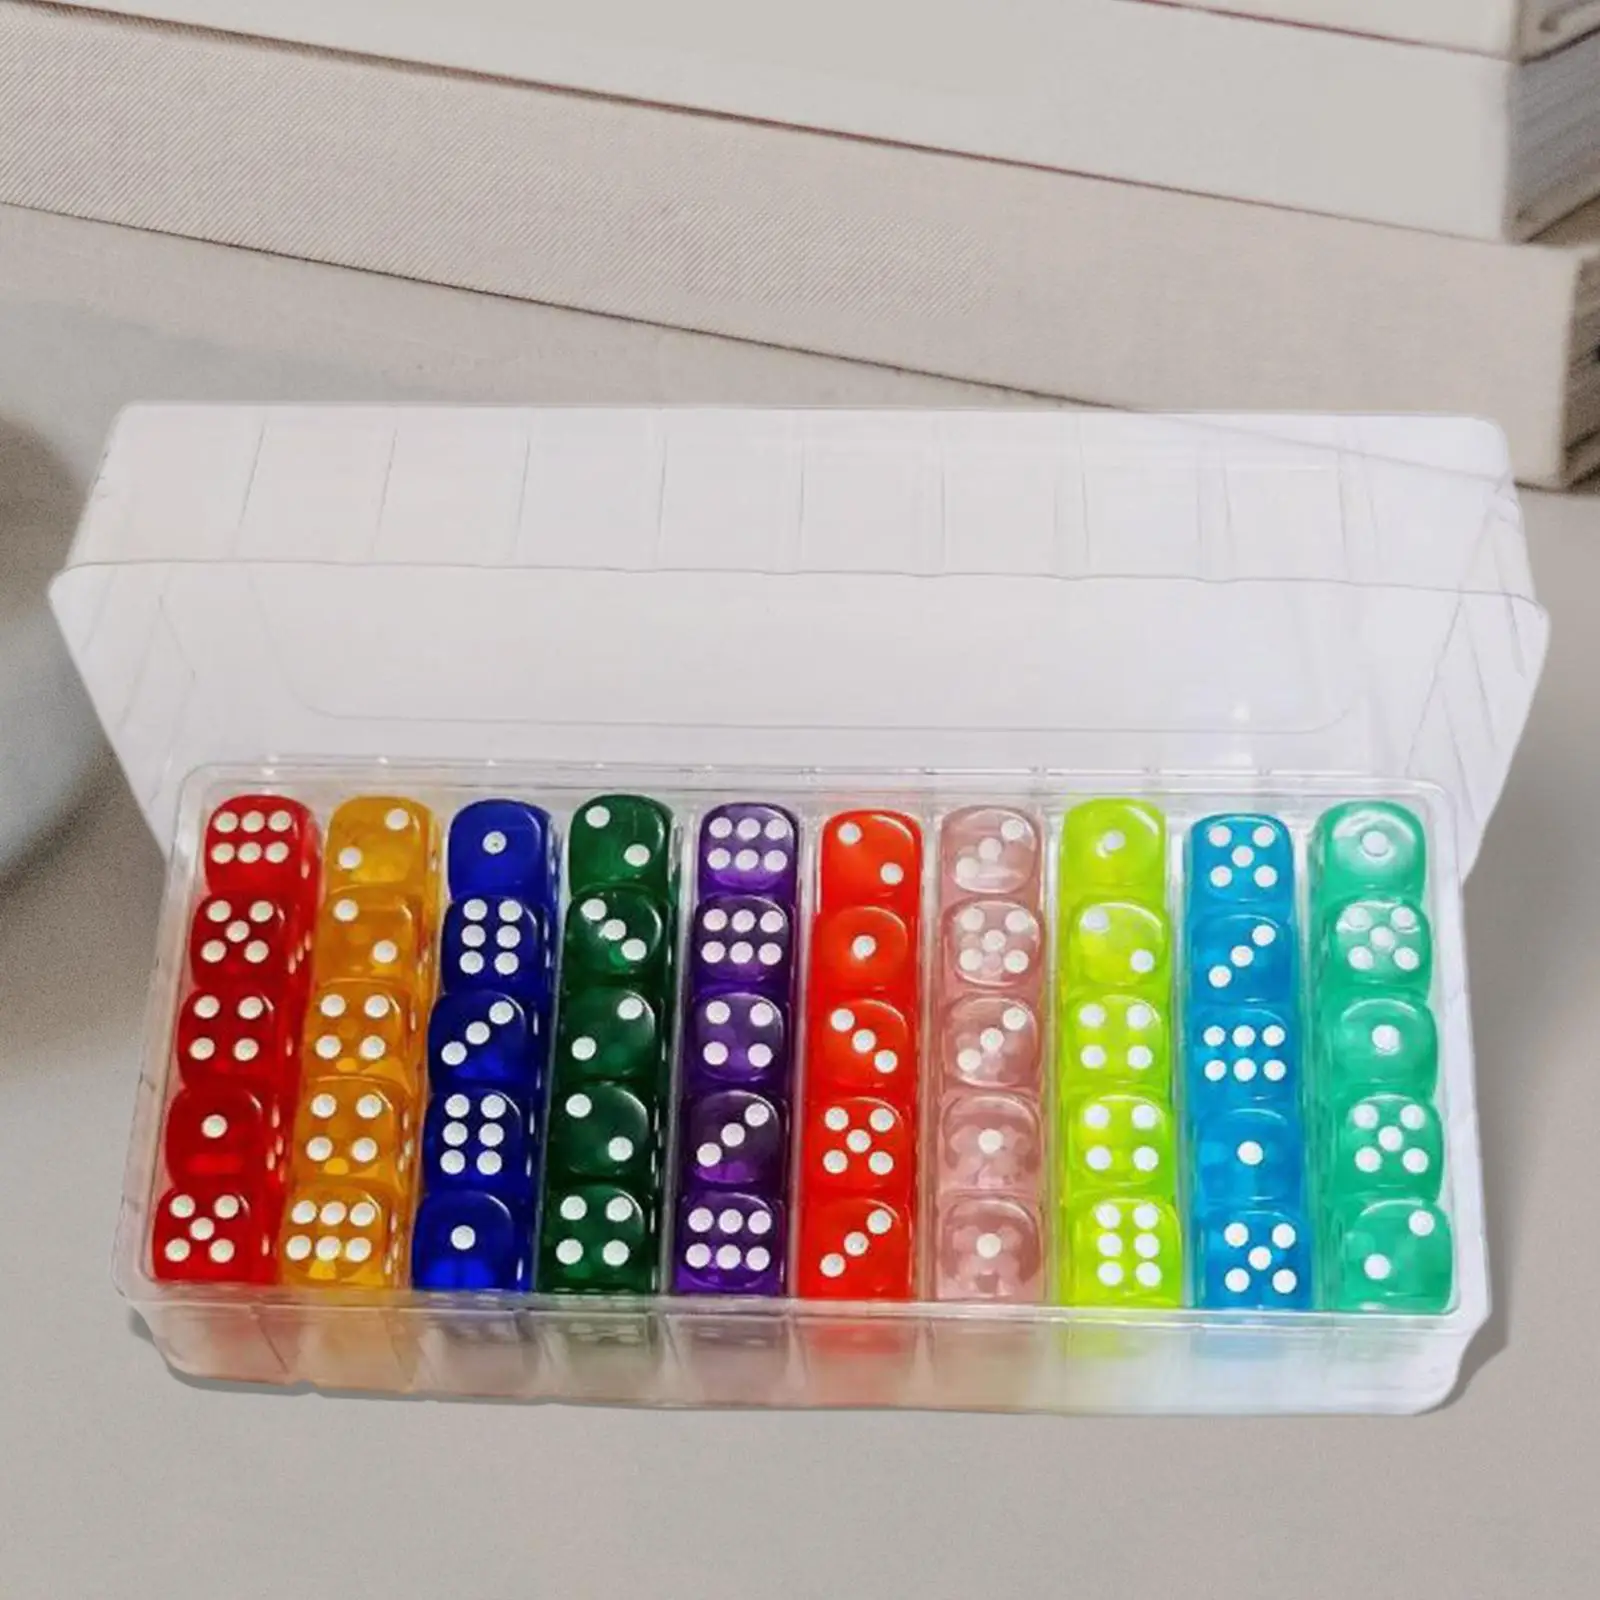 100 Pieces 6 Sided Dice Acrylic Dice 10 Colors for Playing Games Classroom